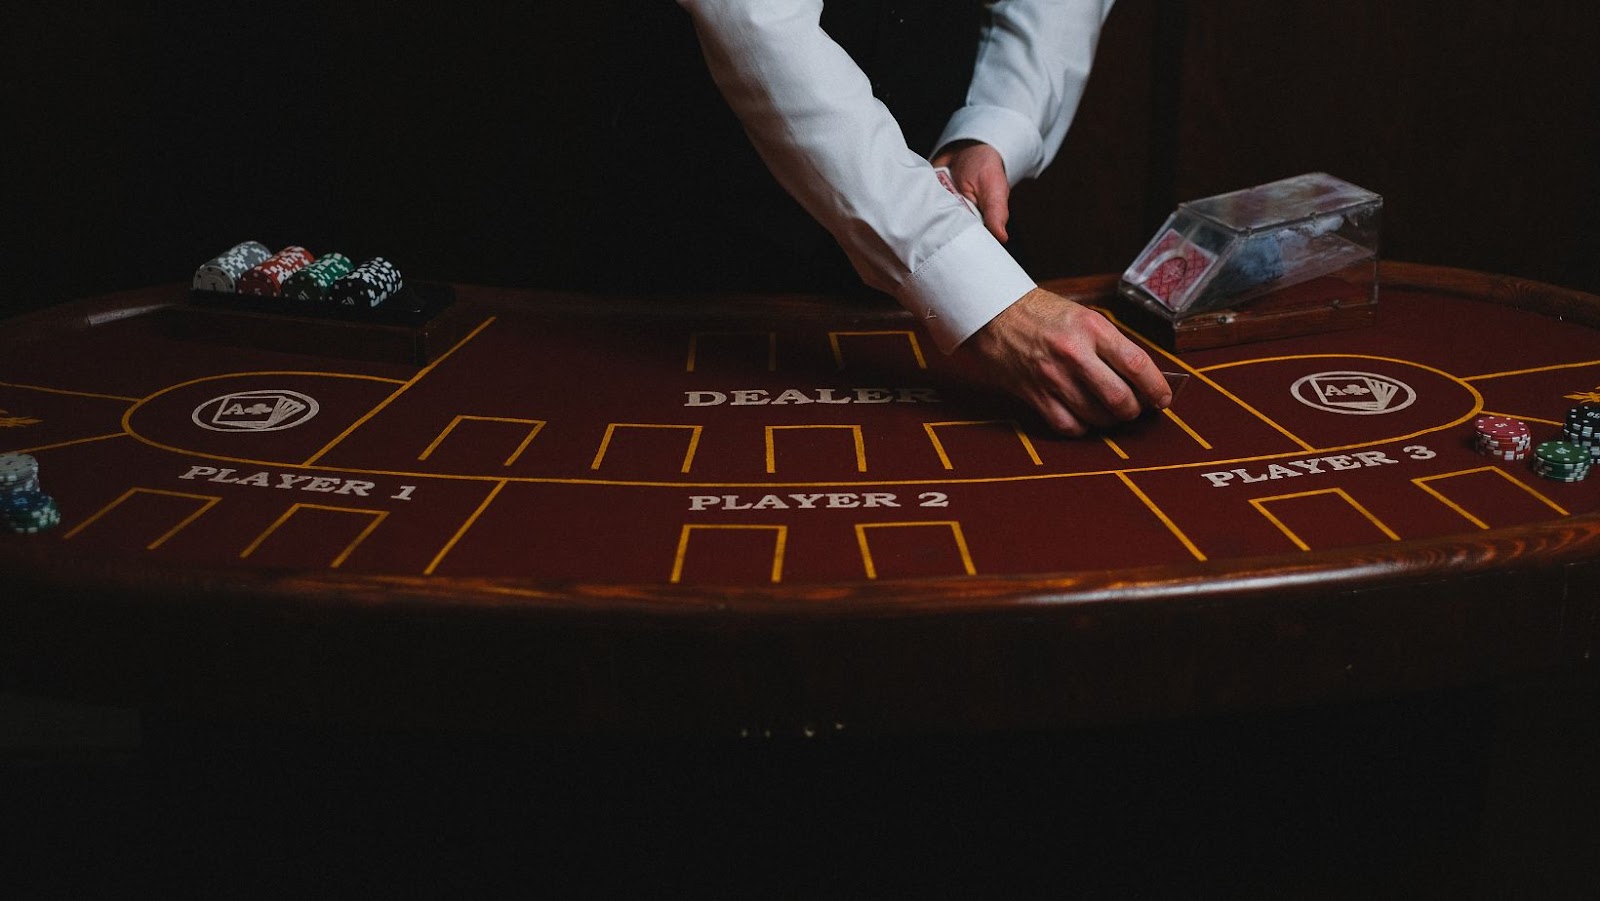 A Guide to Playing at an American Express Casino